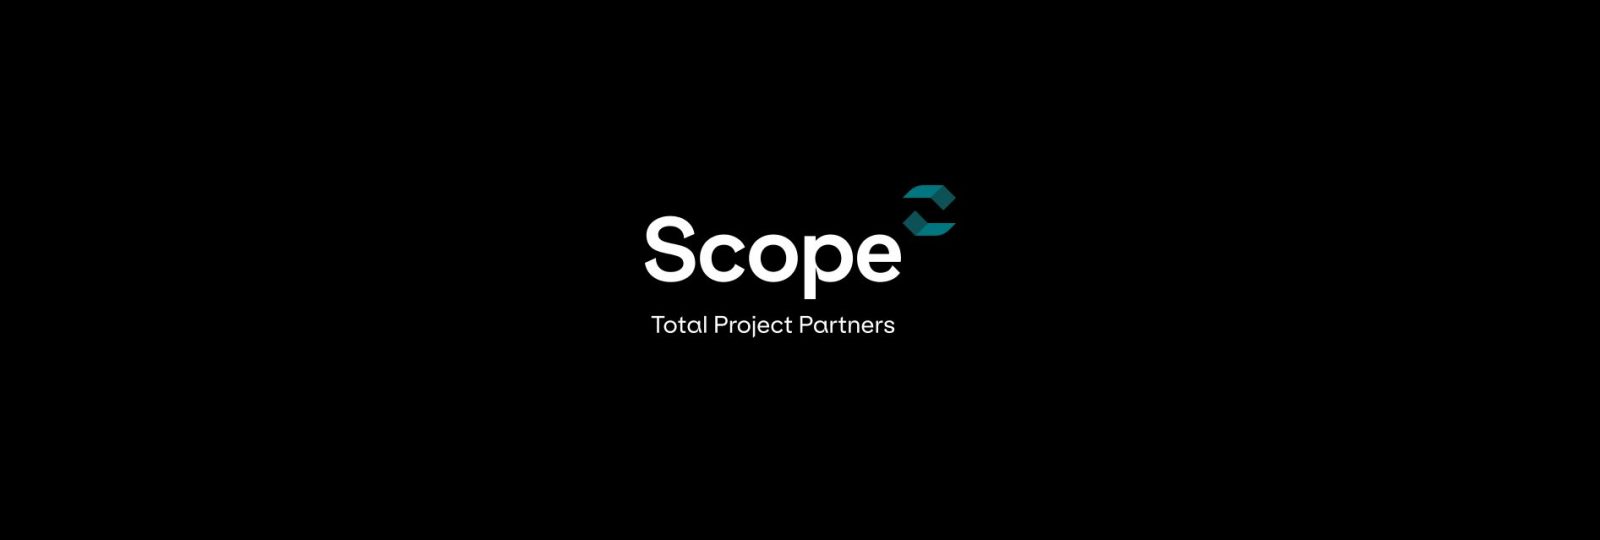 Scope Total Project Partners - Banner Image